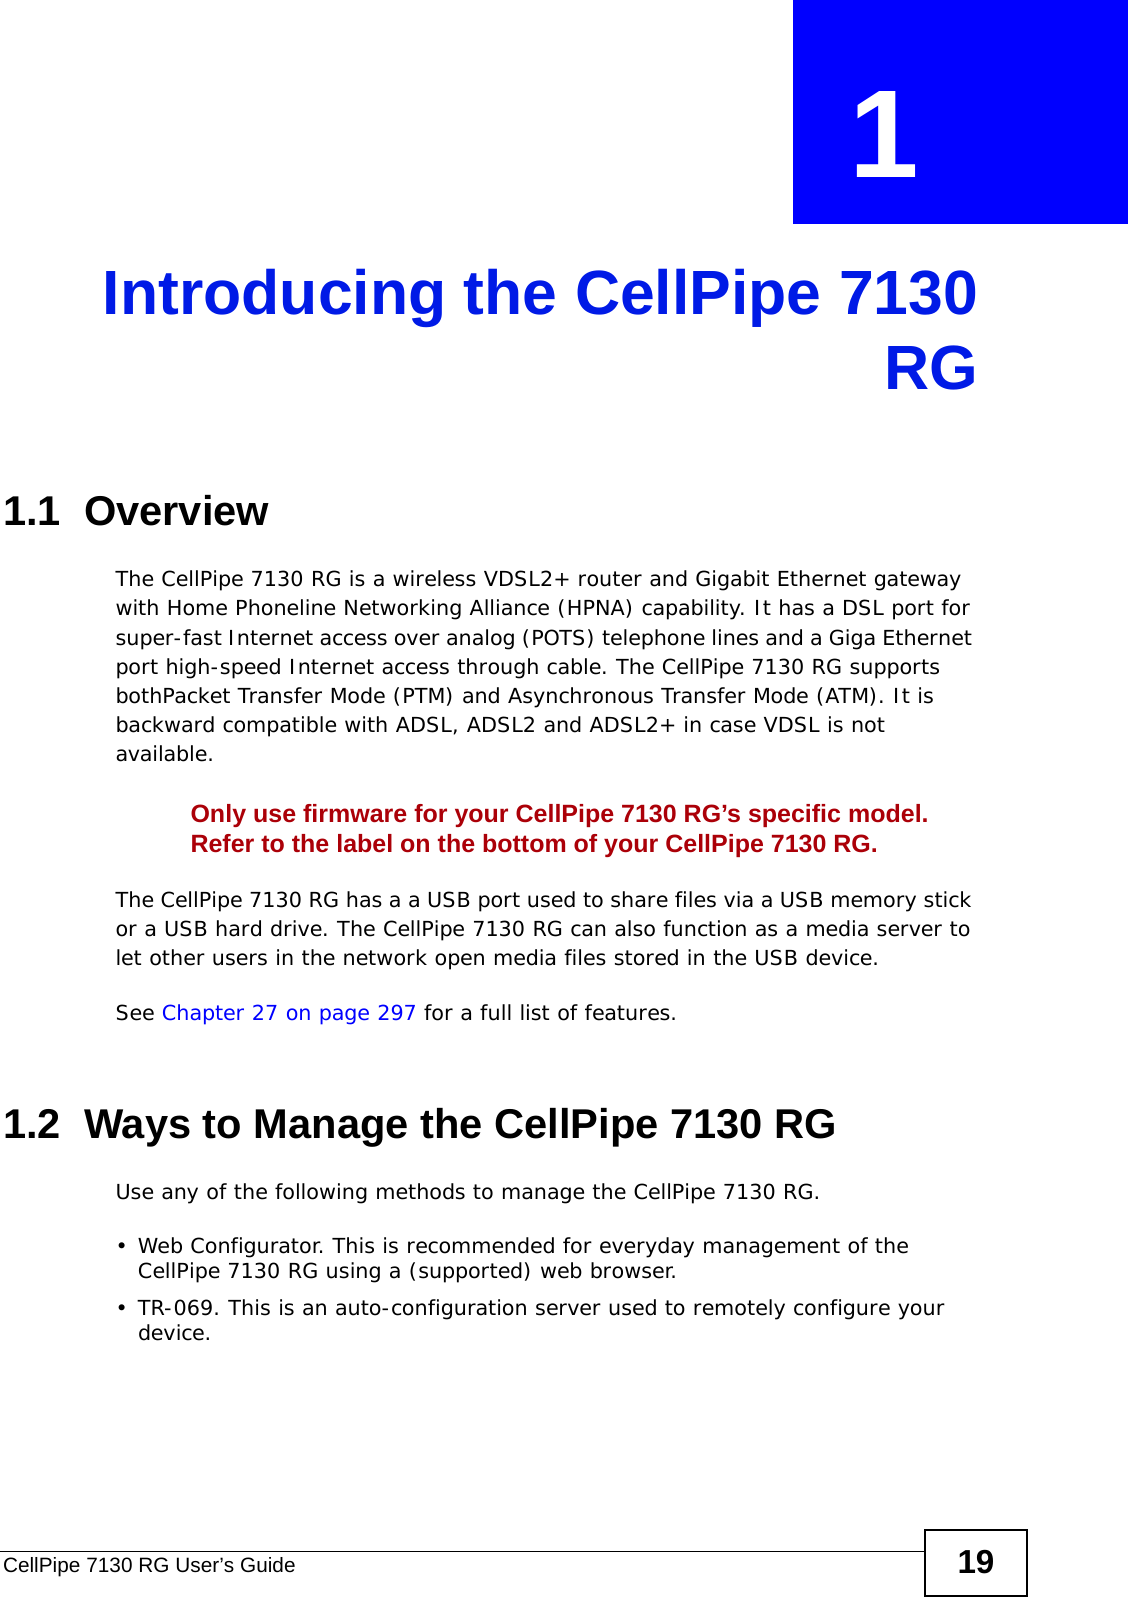 CellPipe 7130 RG User’s Guide 19CHAPTER  1 Introducing the CellPipe 7130RG1.1  OverviewThe CellPipe 7130 RG is a wireless VDSL2+ router and Gigabit Ethernet gateway with Home Phoneline Networking Alliance (HPNA) capability. It has a DSL port for super-fast Internet access over analog (POTS) telephone lines and a Giga Ethernet port high-speed Internet access through cable. The CellPipe 7130 RG supports bothPacket Transfer Mode (PTM) and Asynchronous Transfer Mode (ATM). It is backward compatible with ADSL, ADSL2 and ADSL2+ in case VDSL is not available.Only use firmware for your CellPipe 7130 RG’s specific model. Refer to the label on the bottom of your CellPipe 7130 RG.The CellPipe 7130 RG has a a USB port used to share files via a USB memory stick or a USB hard drive. The CellPipe 7130 RG can also function as a media server to let other users in the network open media files stored in the USB device.See Chapter 27 on page 297 for a full list of features.1.2  Ways to Manage the CellPipe 7130 RGUse any of the following methods to manage the CellPipe 7130 RG.• Web Configurator. This is recommended for everyday management of the CellPipe 7130 RG using a (supported) web browser.• TR-069. This is an auto-configuration server used to remotely configure your device.